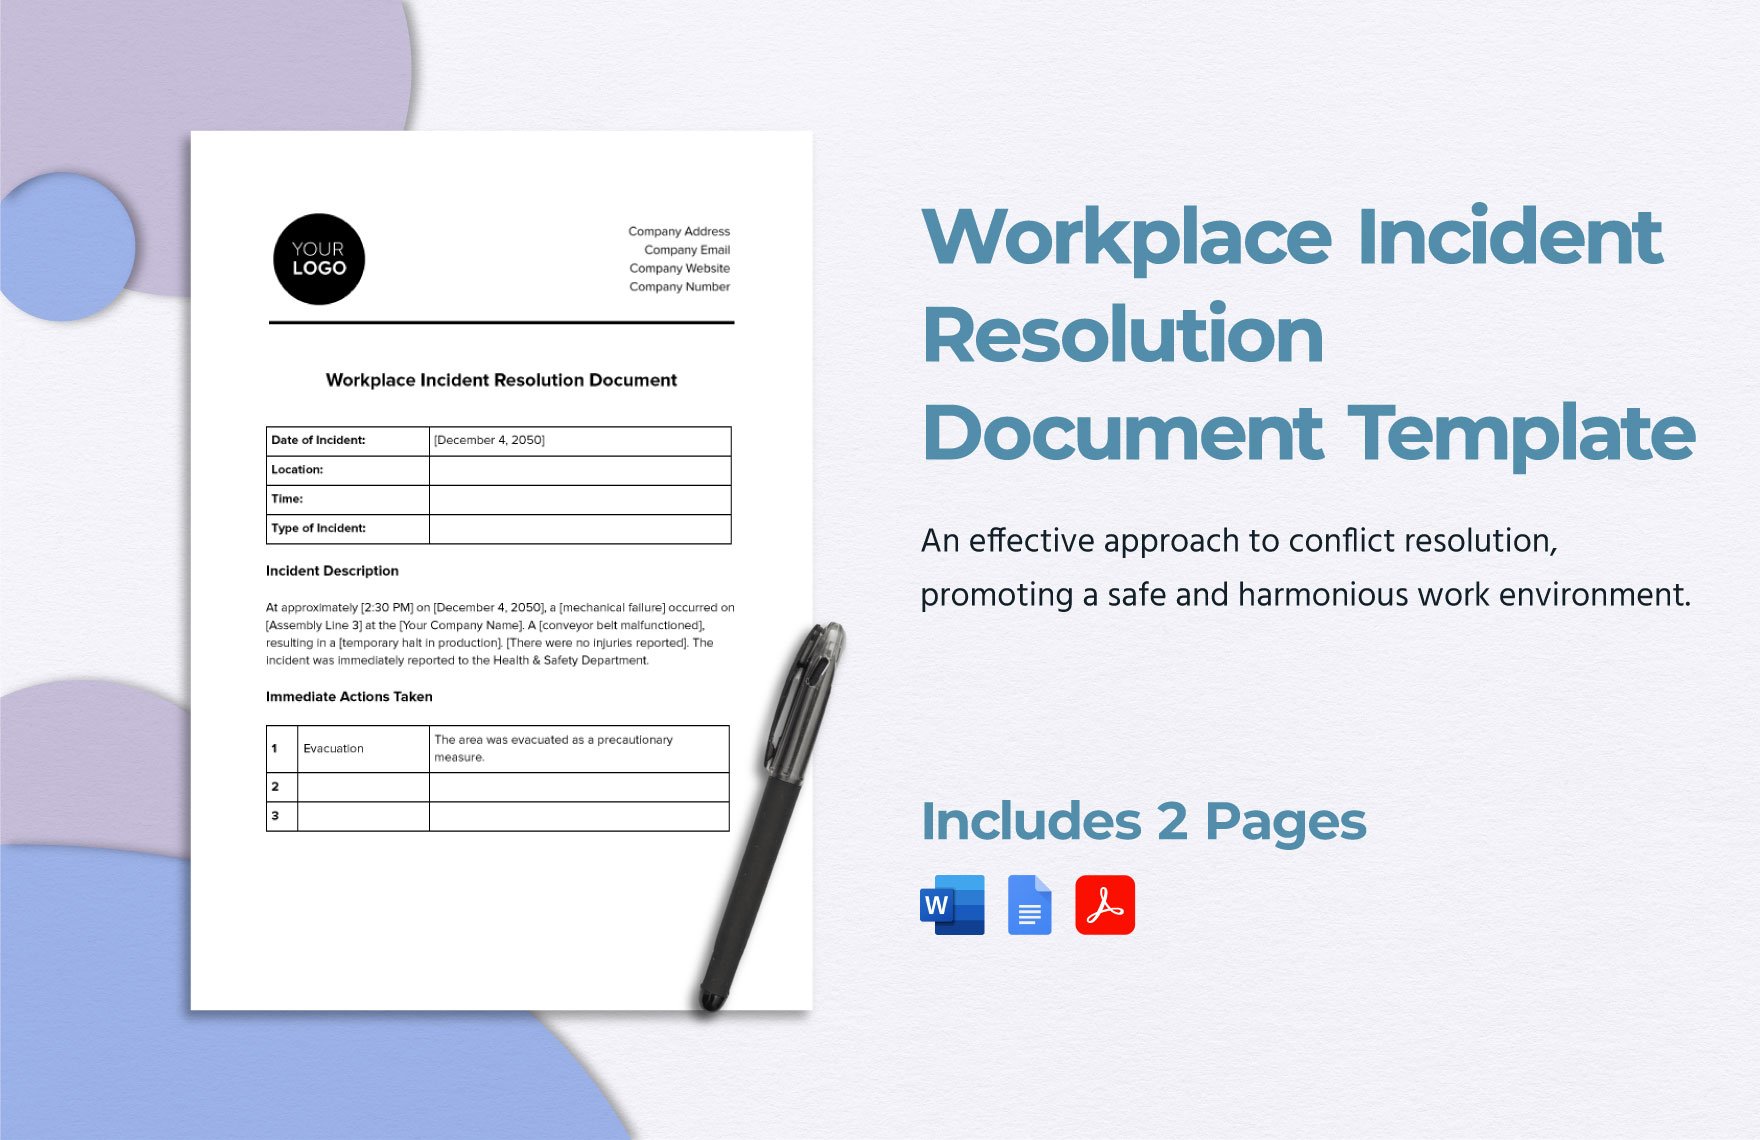 Workplace Incident Resolution Document Template